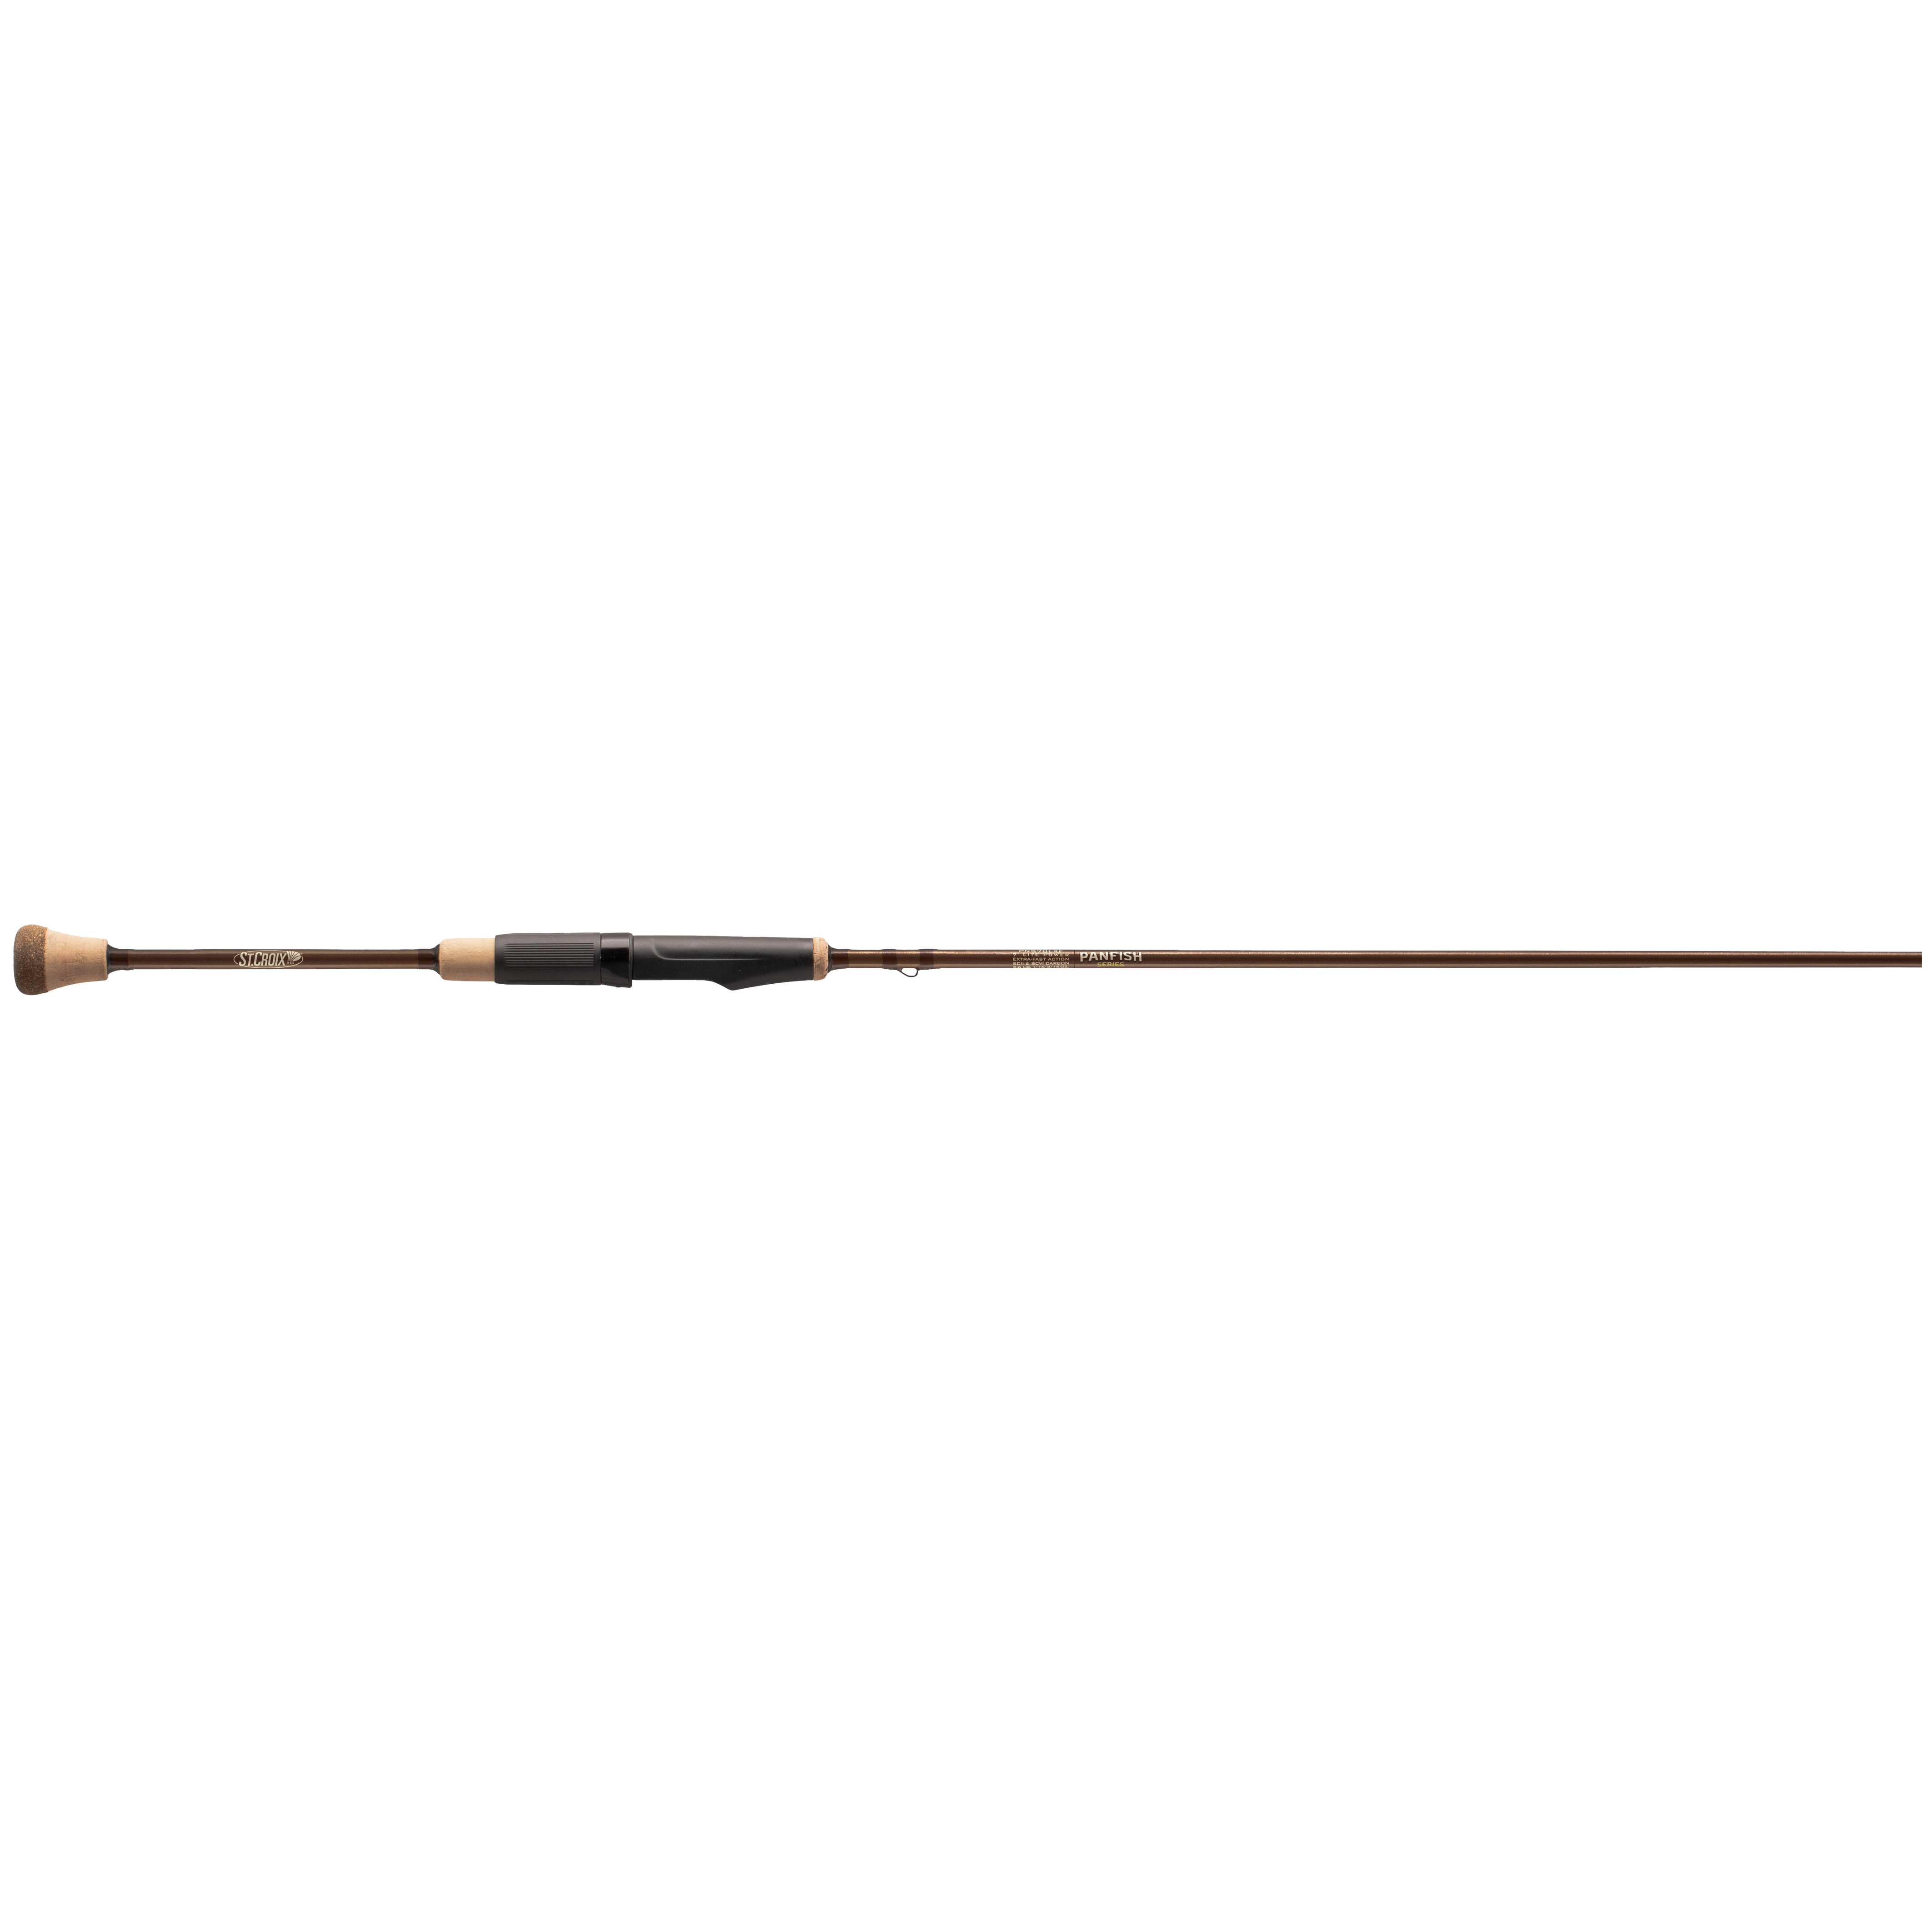 ACC Crappie Stix Green Series 6'6 Spinning Rod Med